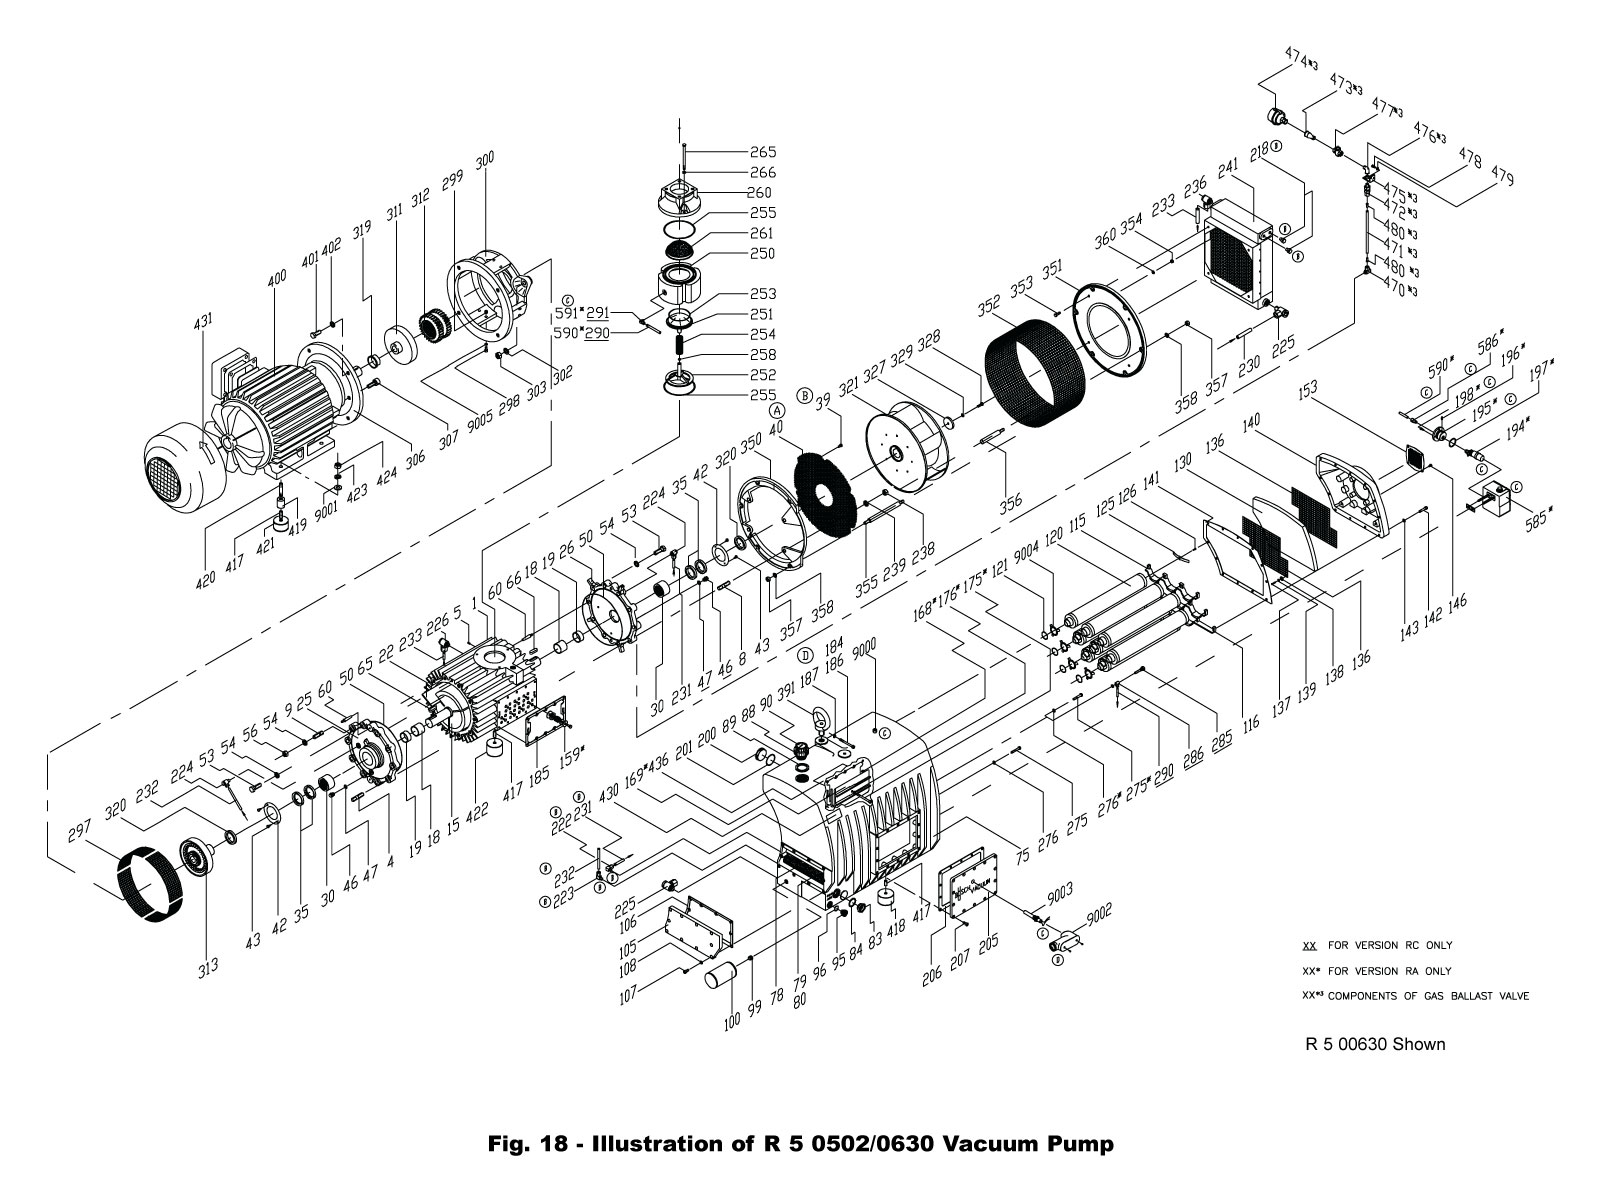 Parts Diagrams & Ordering - Total Maintenance Solutions